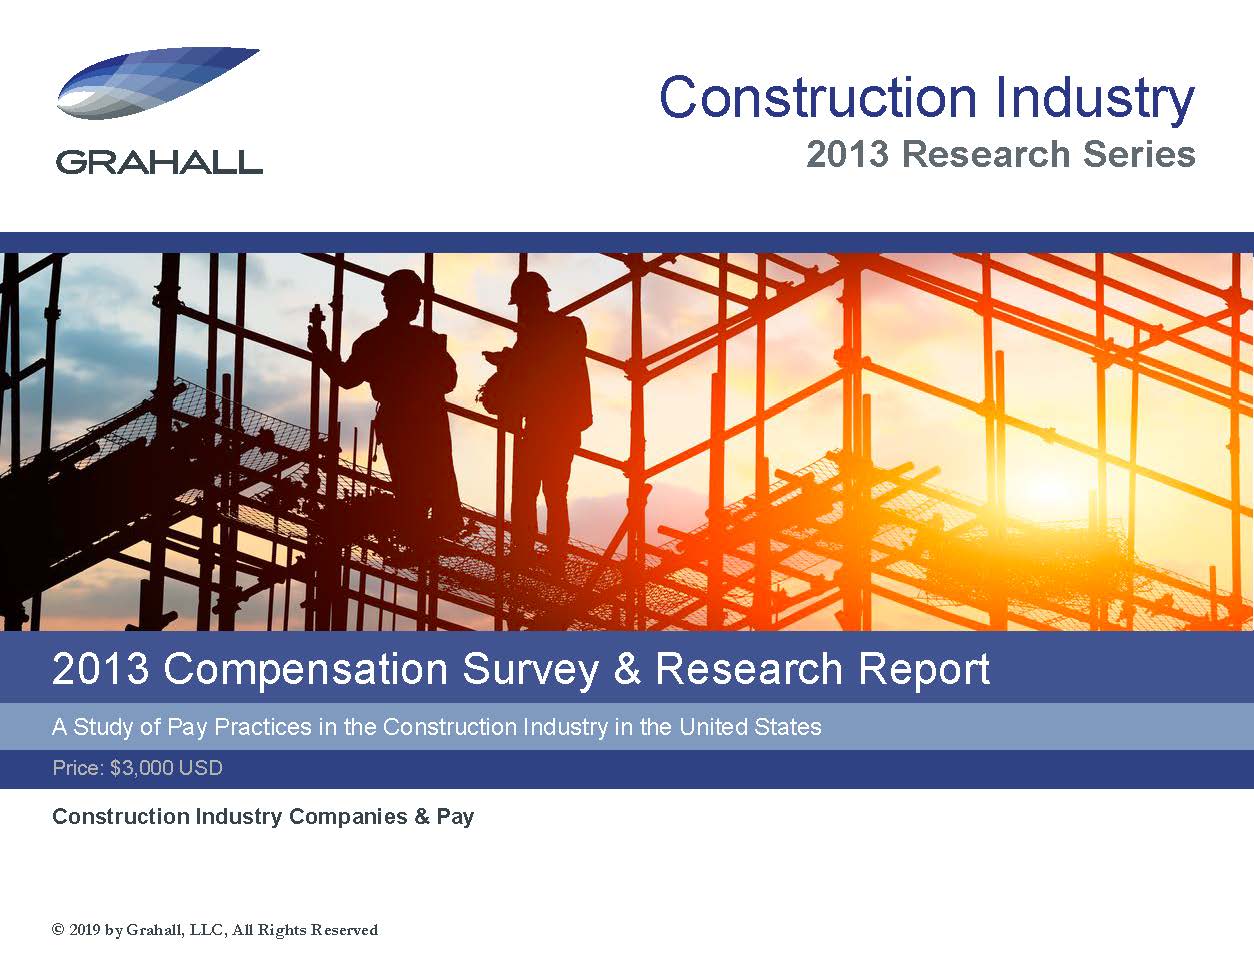 A Study of Pay Practices in the Construction Industry in the United States